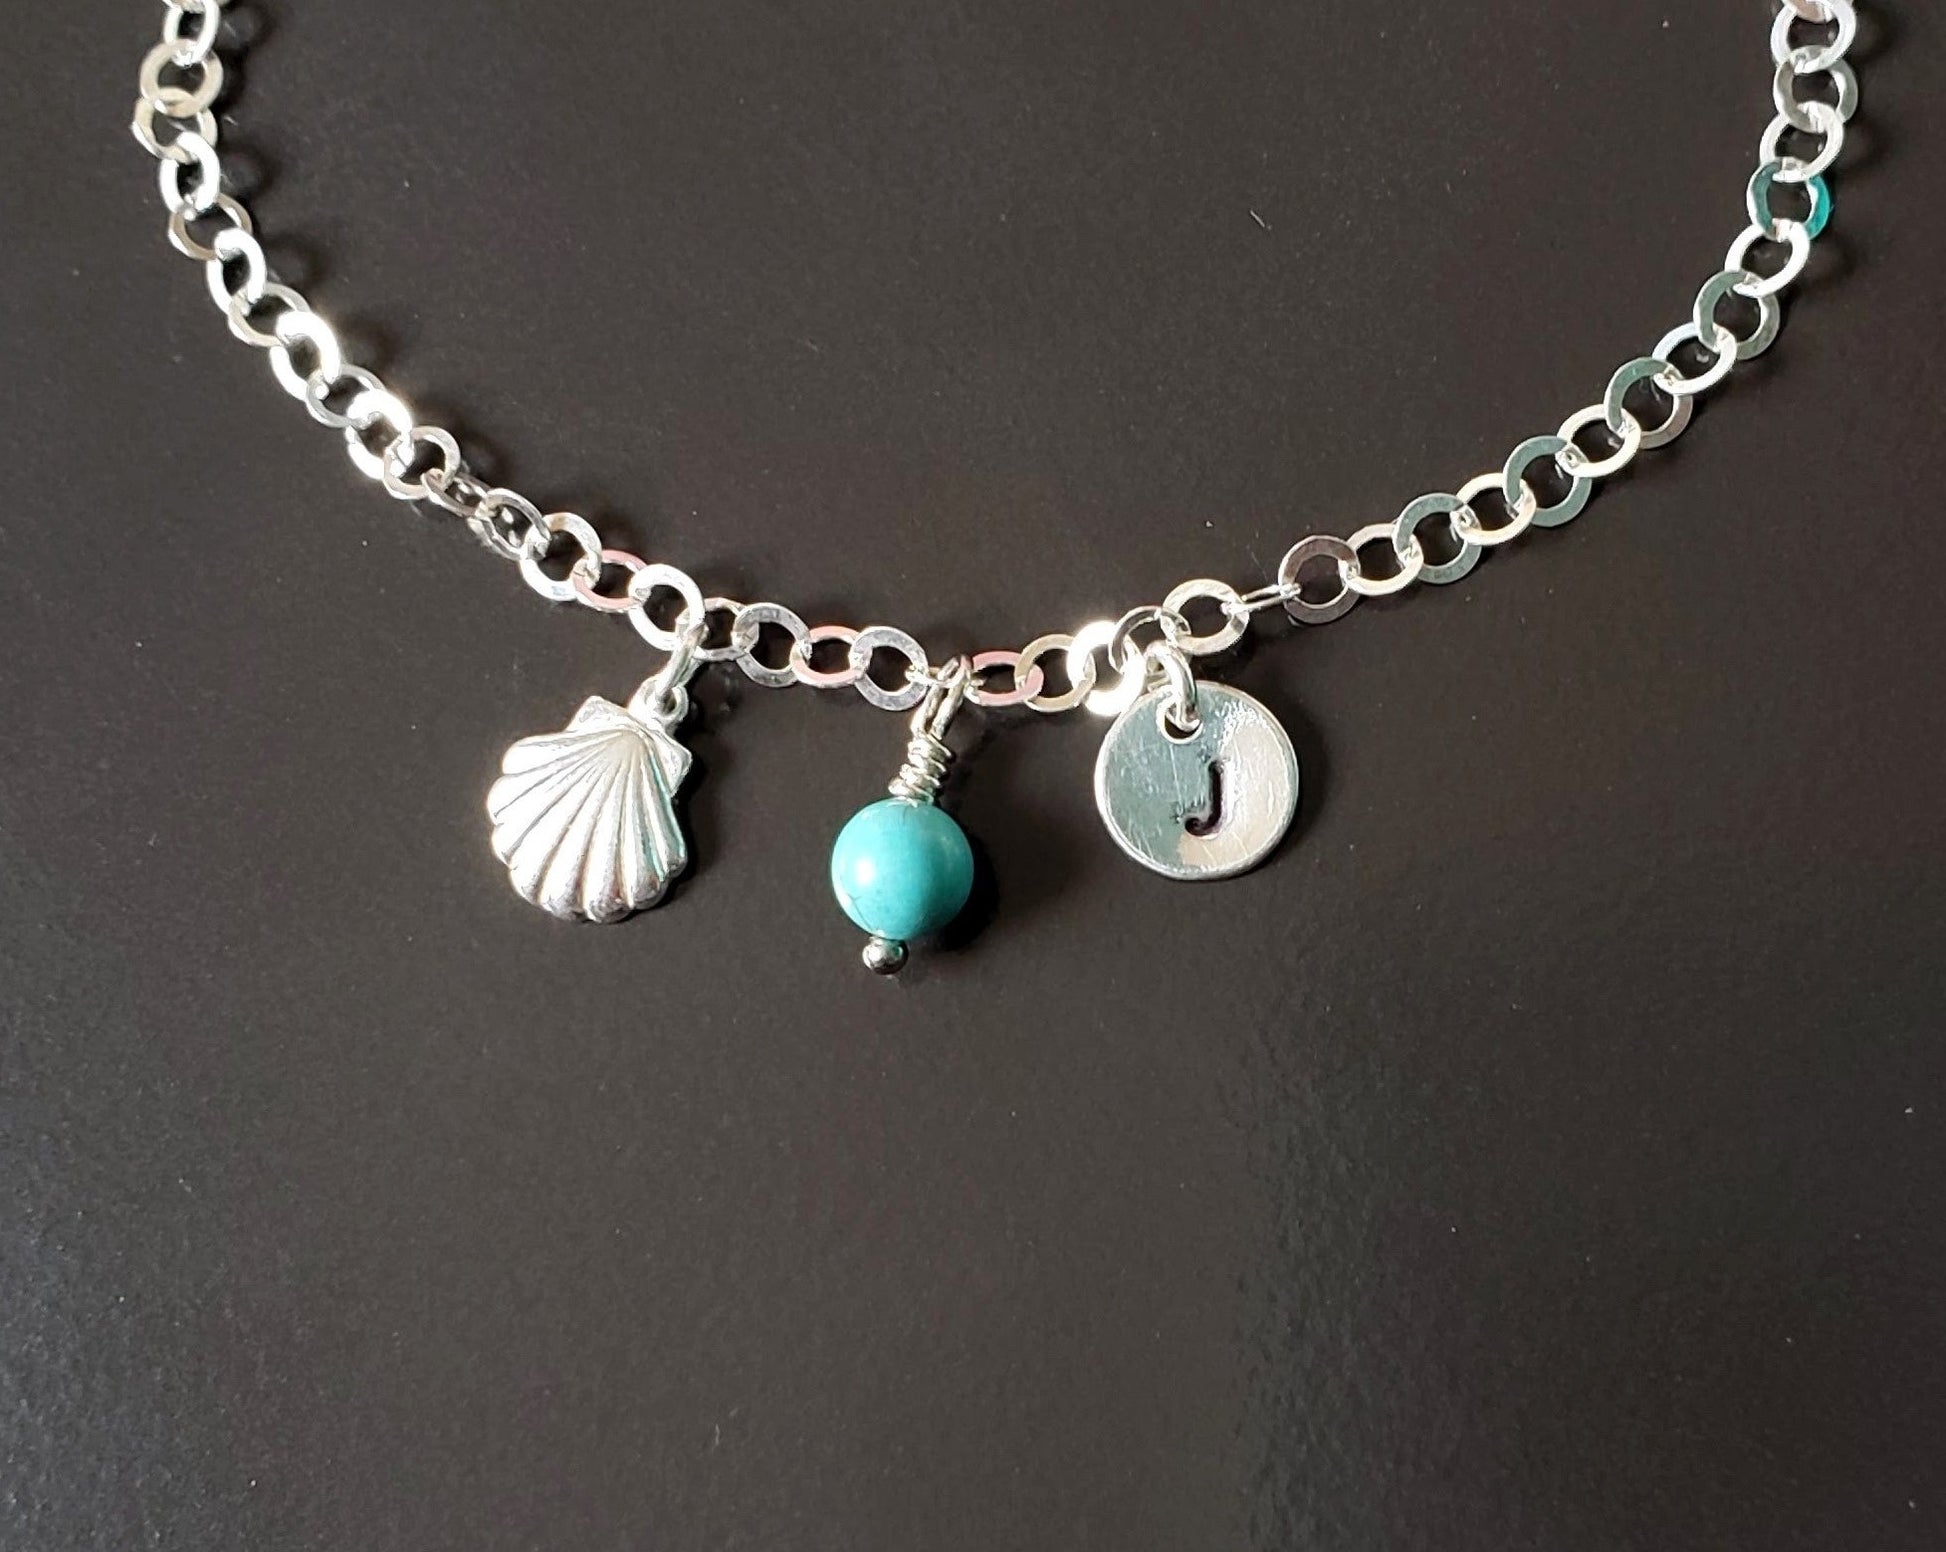 Deluxe Personalized Anklet-Ankle Bracelet, a shell, an round initial pendant and Turquoise birthstone pendant dangle from sparkly sterling silver chain, displayed on black background. 